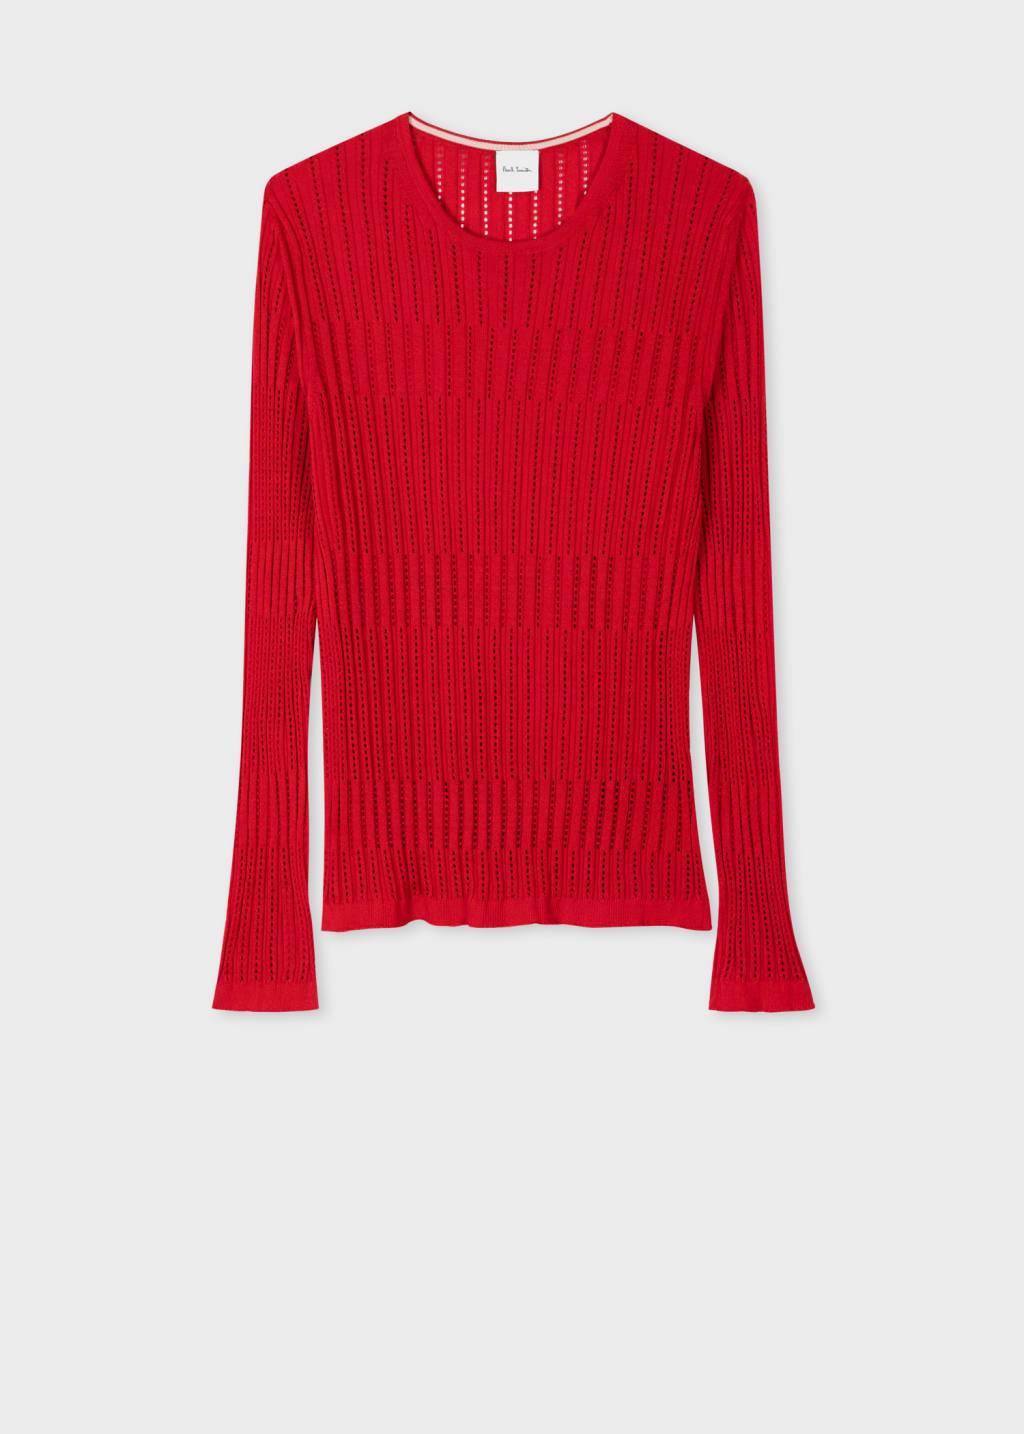 Front View - Women's Red Knitted Long Sleeve Top Paul Smith